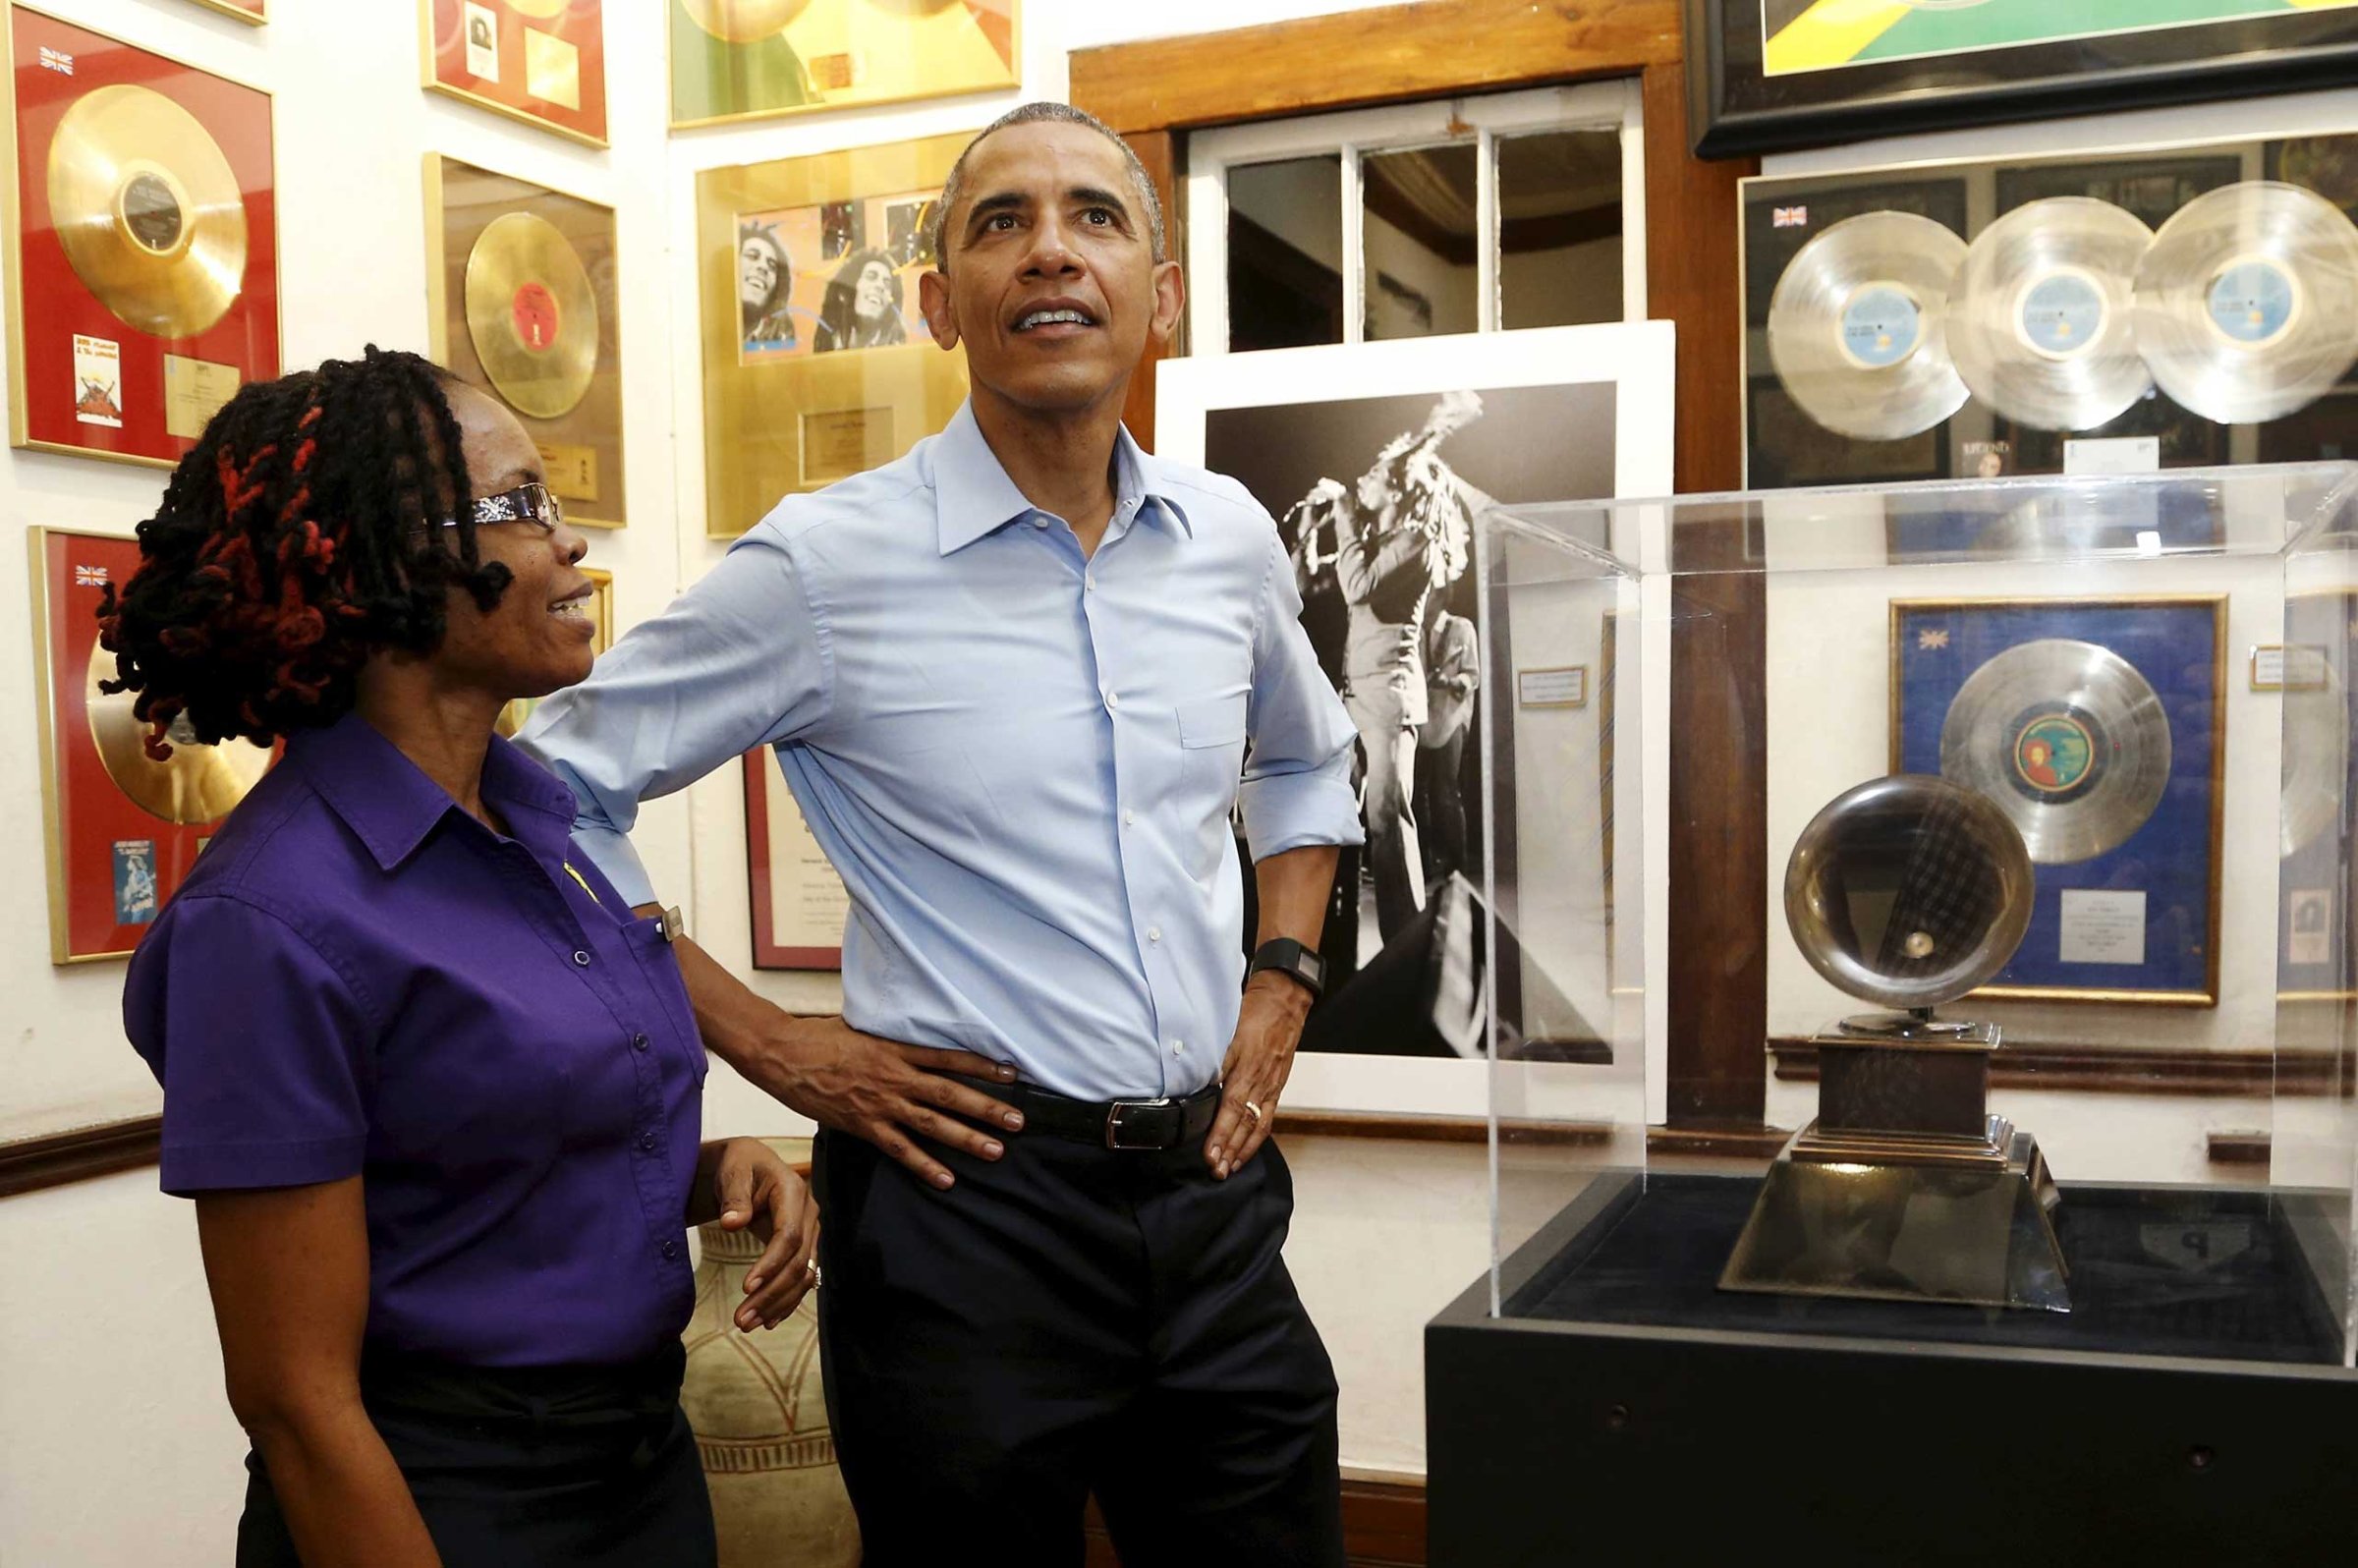 U.S. President Barack Obama gets a tour of the Bob Marley Museum from staff member Natasha Clark (L) in Kingston, Jamaica on April 8, 2015.